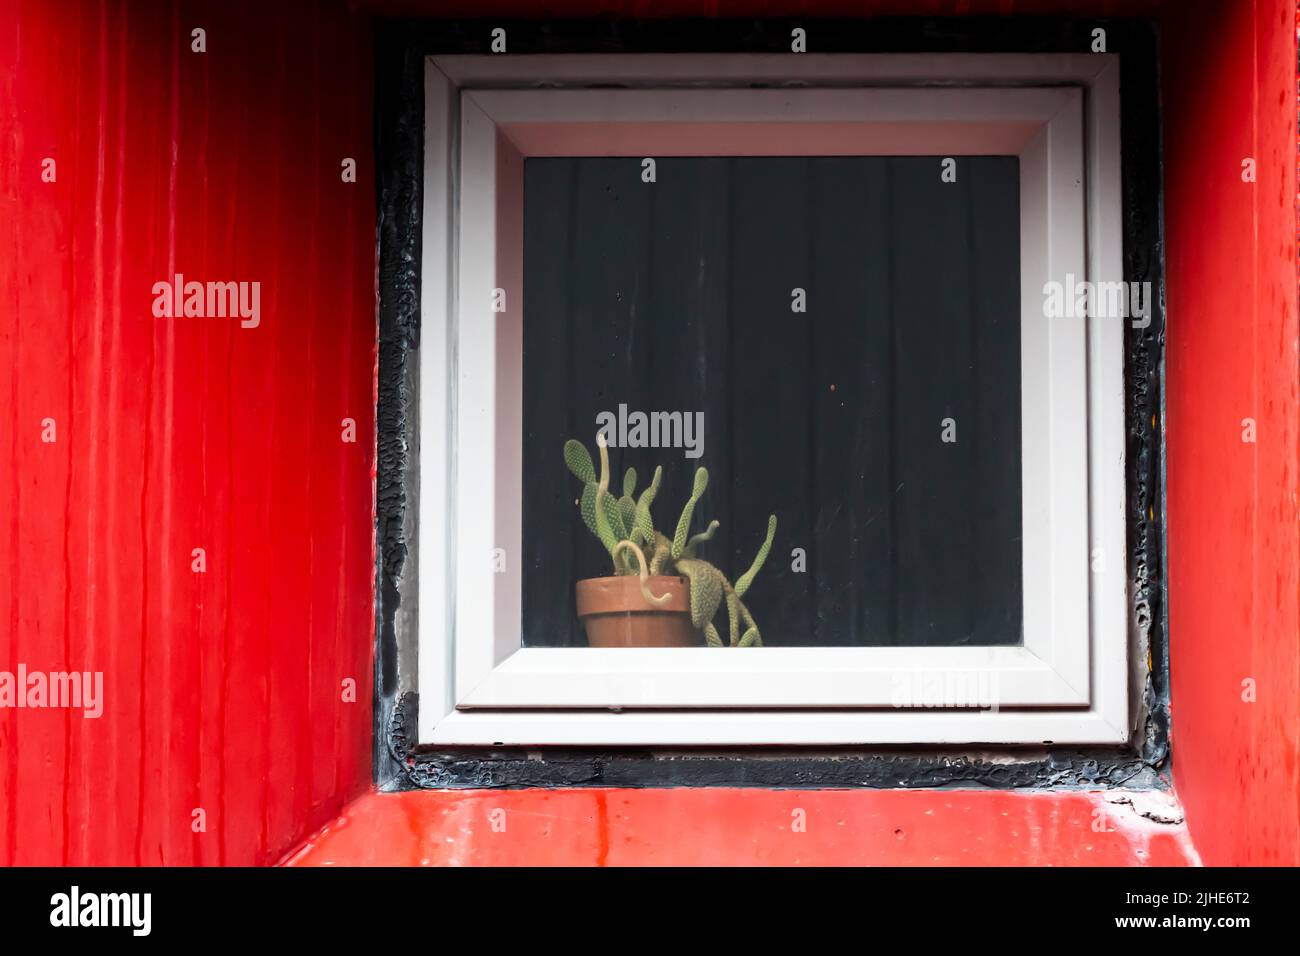 Pot plant in window in red wall, Wellington, North Island, New Zealand Stock Photo